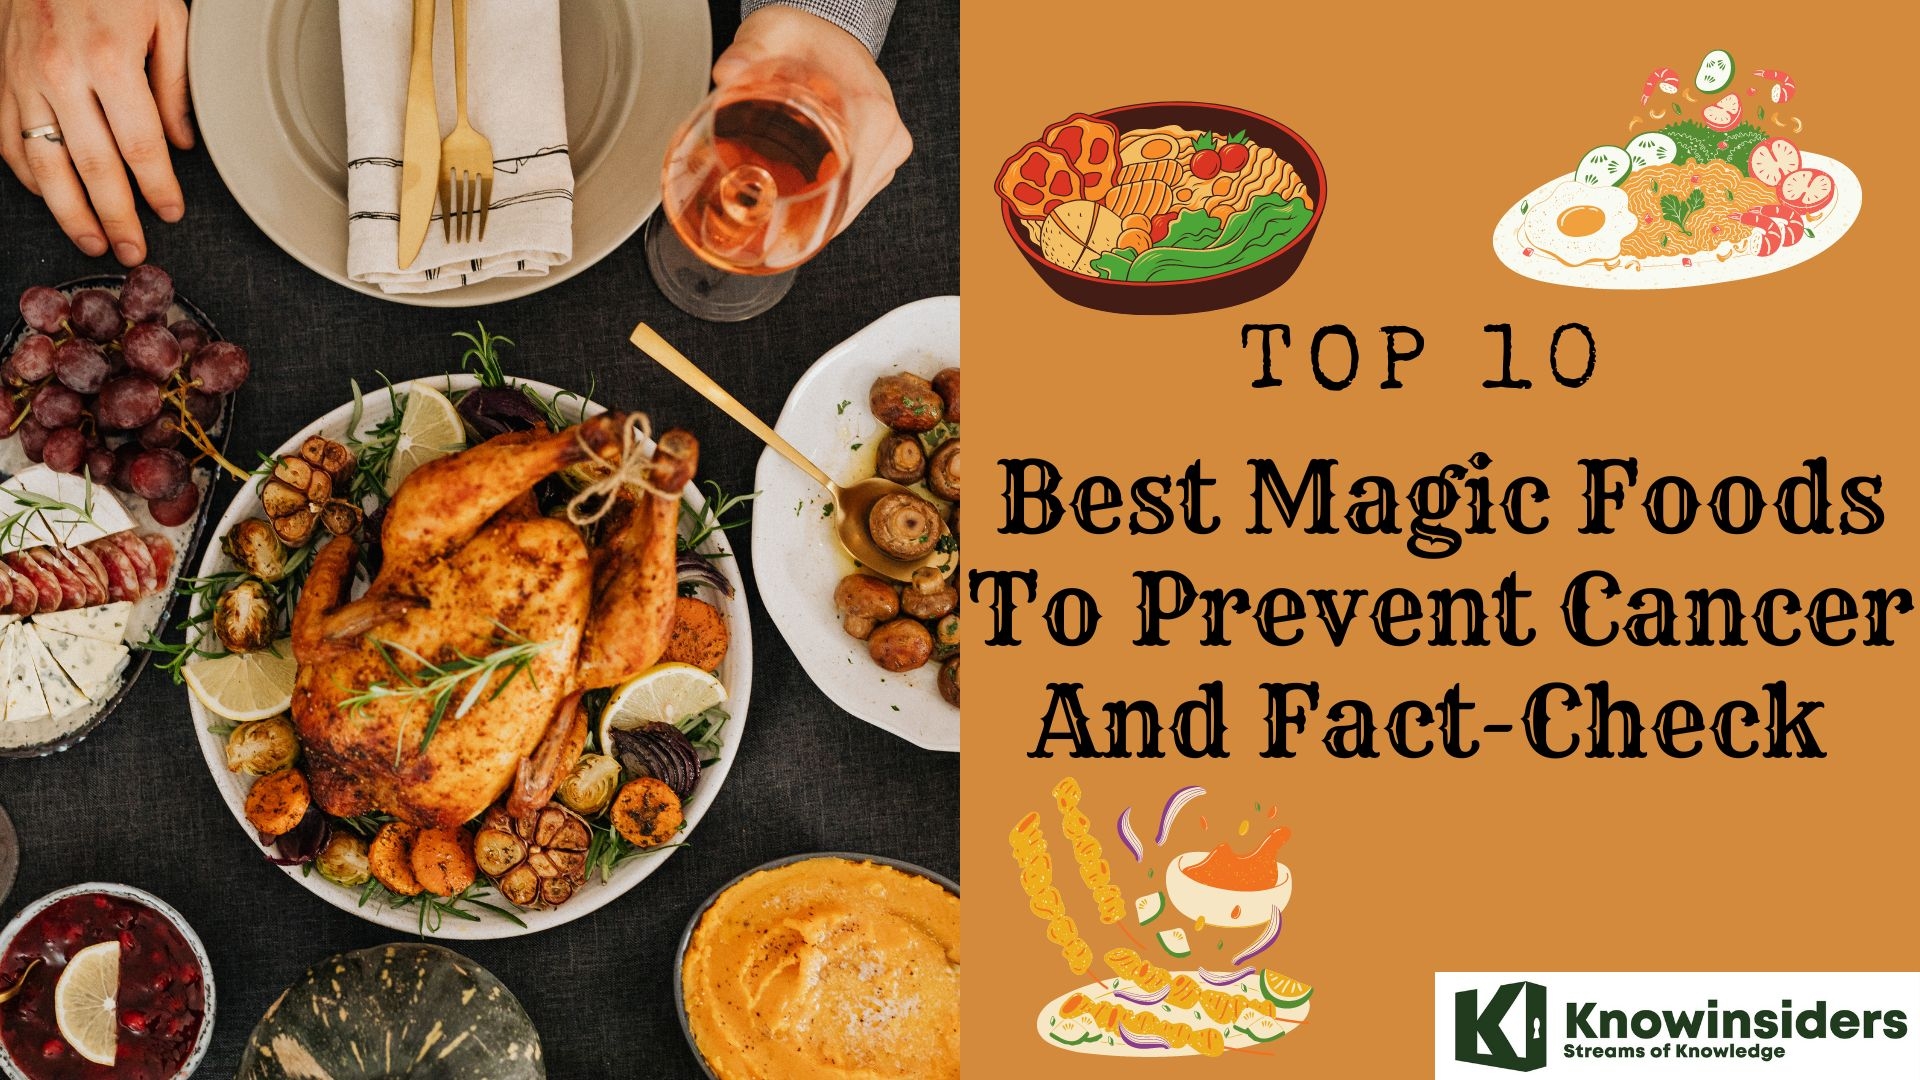 Top 10 Best Magic Foods To Prevent Cancer And Fact-Check